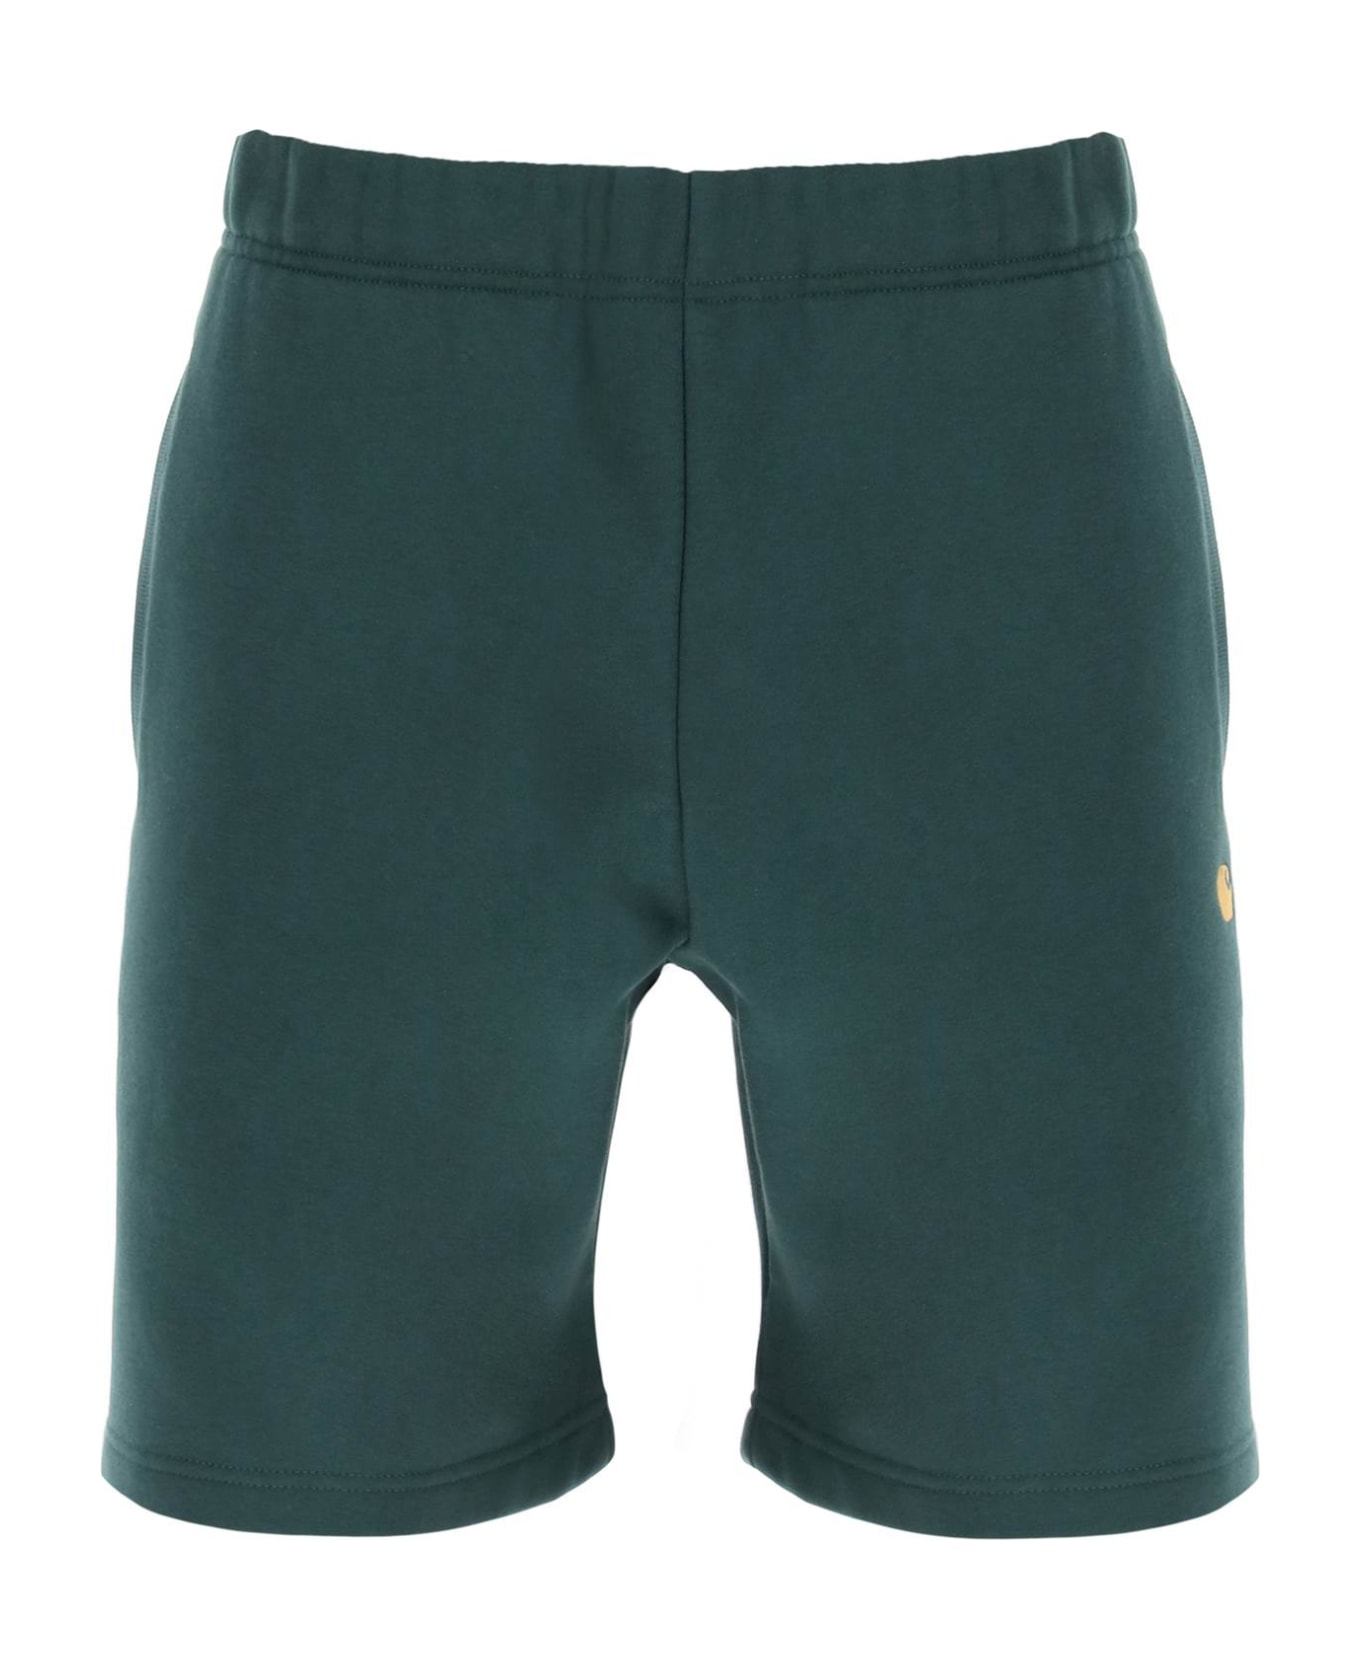 Carhartt Chase Sweat Shorts - DISCOVERY GREEN GOLD (Green)